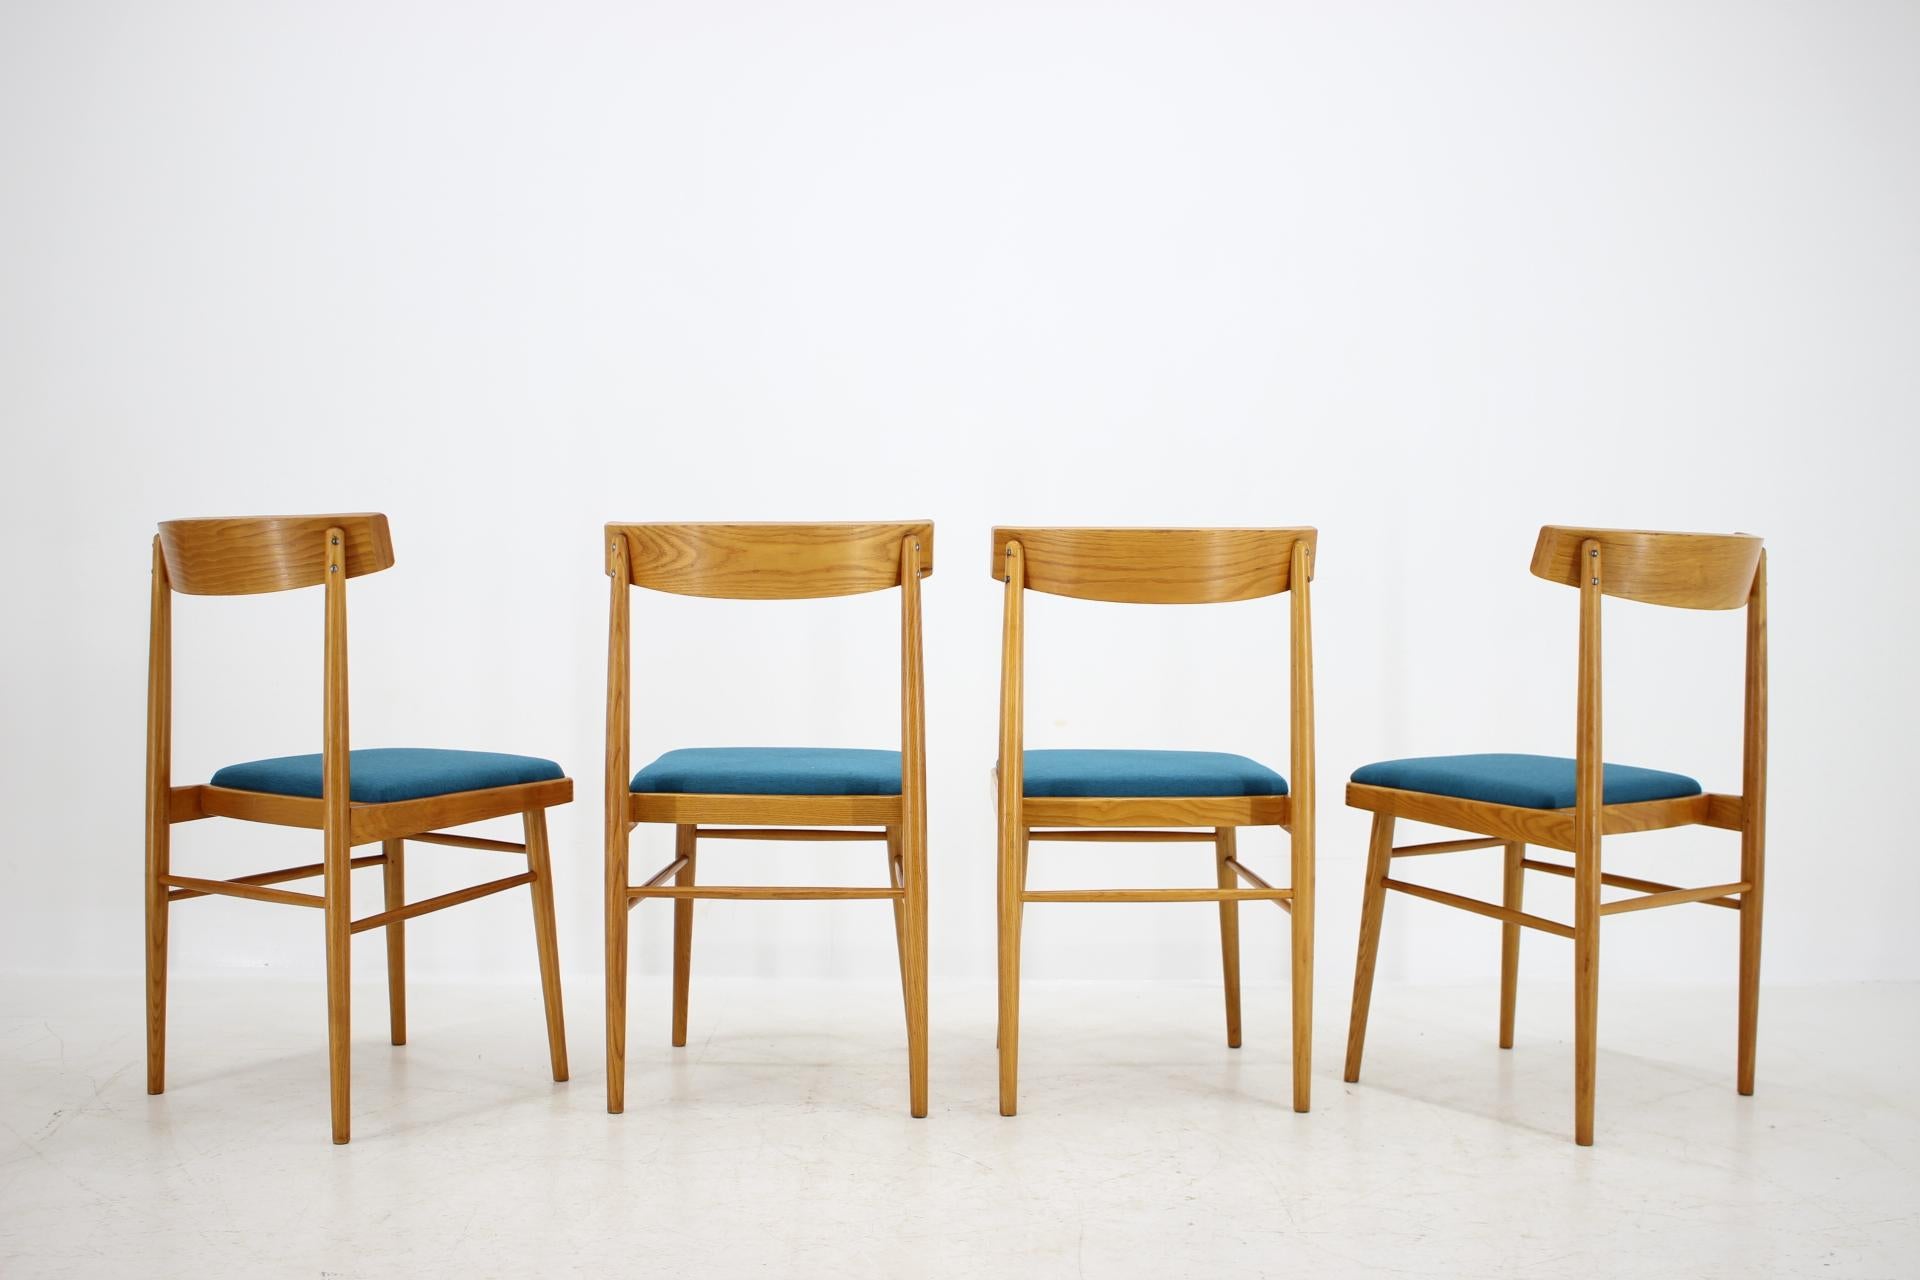 70's dining chairs